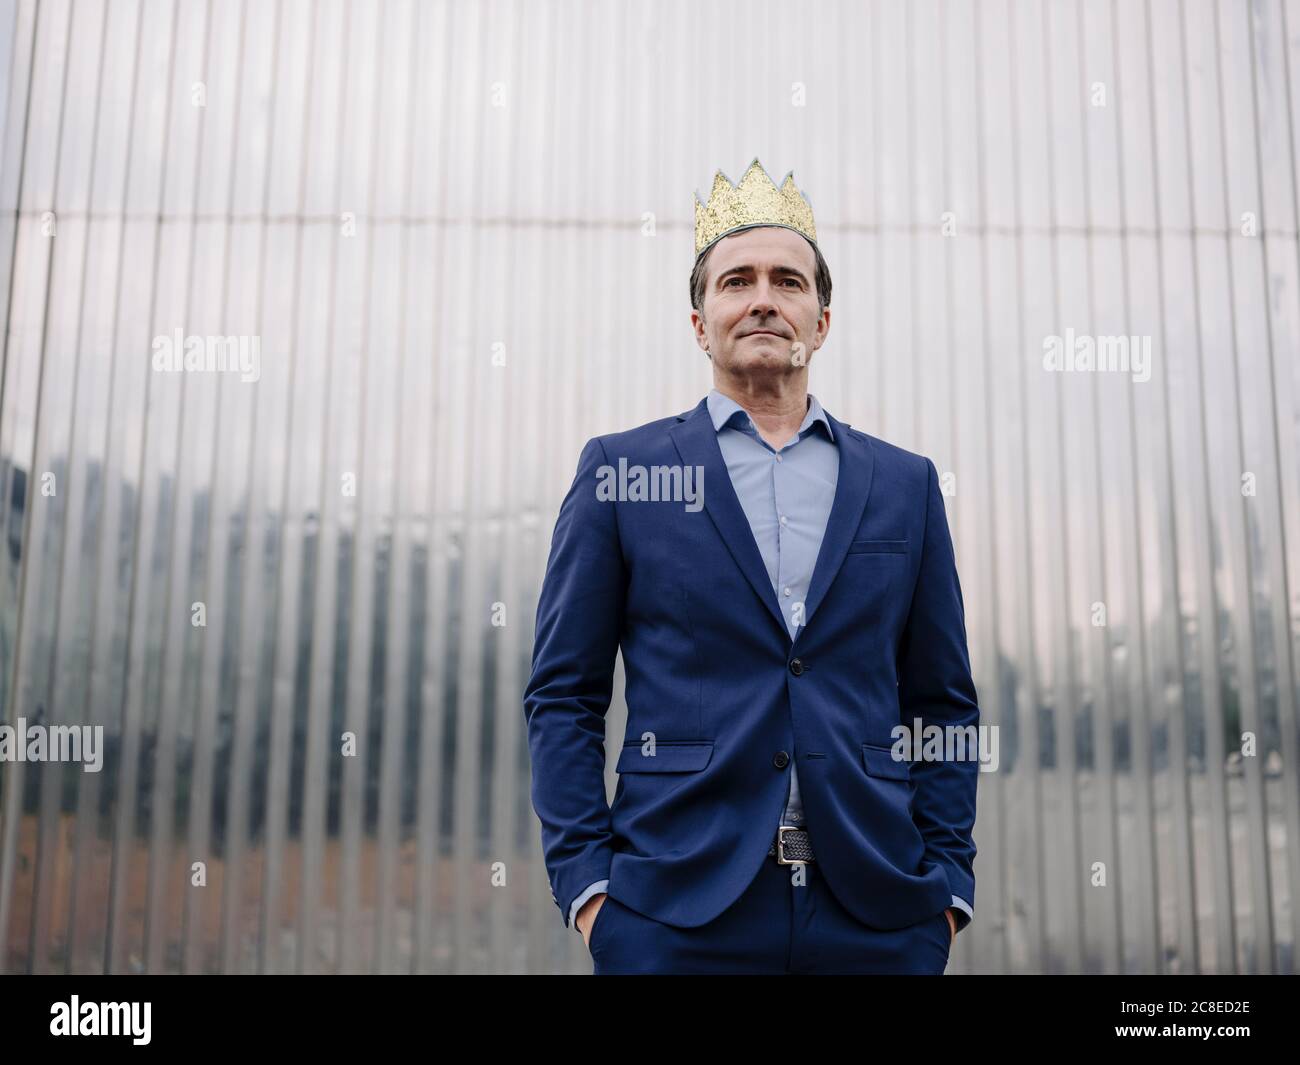 Portrait of a confident mature businessman wearing a toy crown Stock Photo